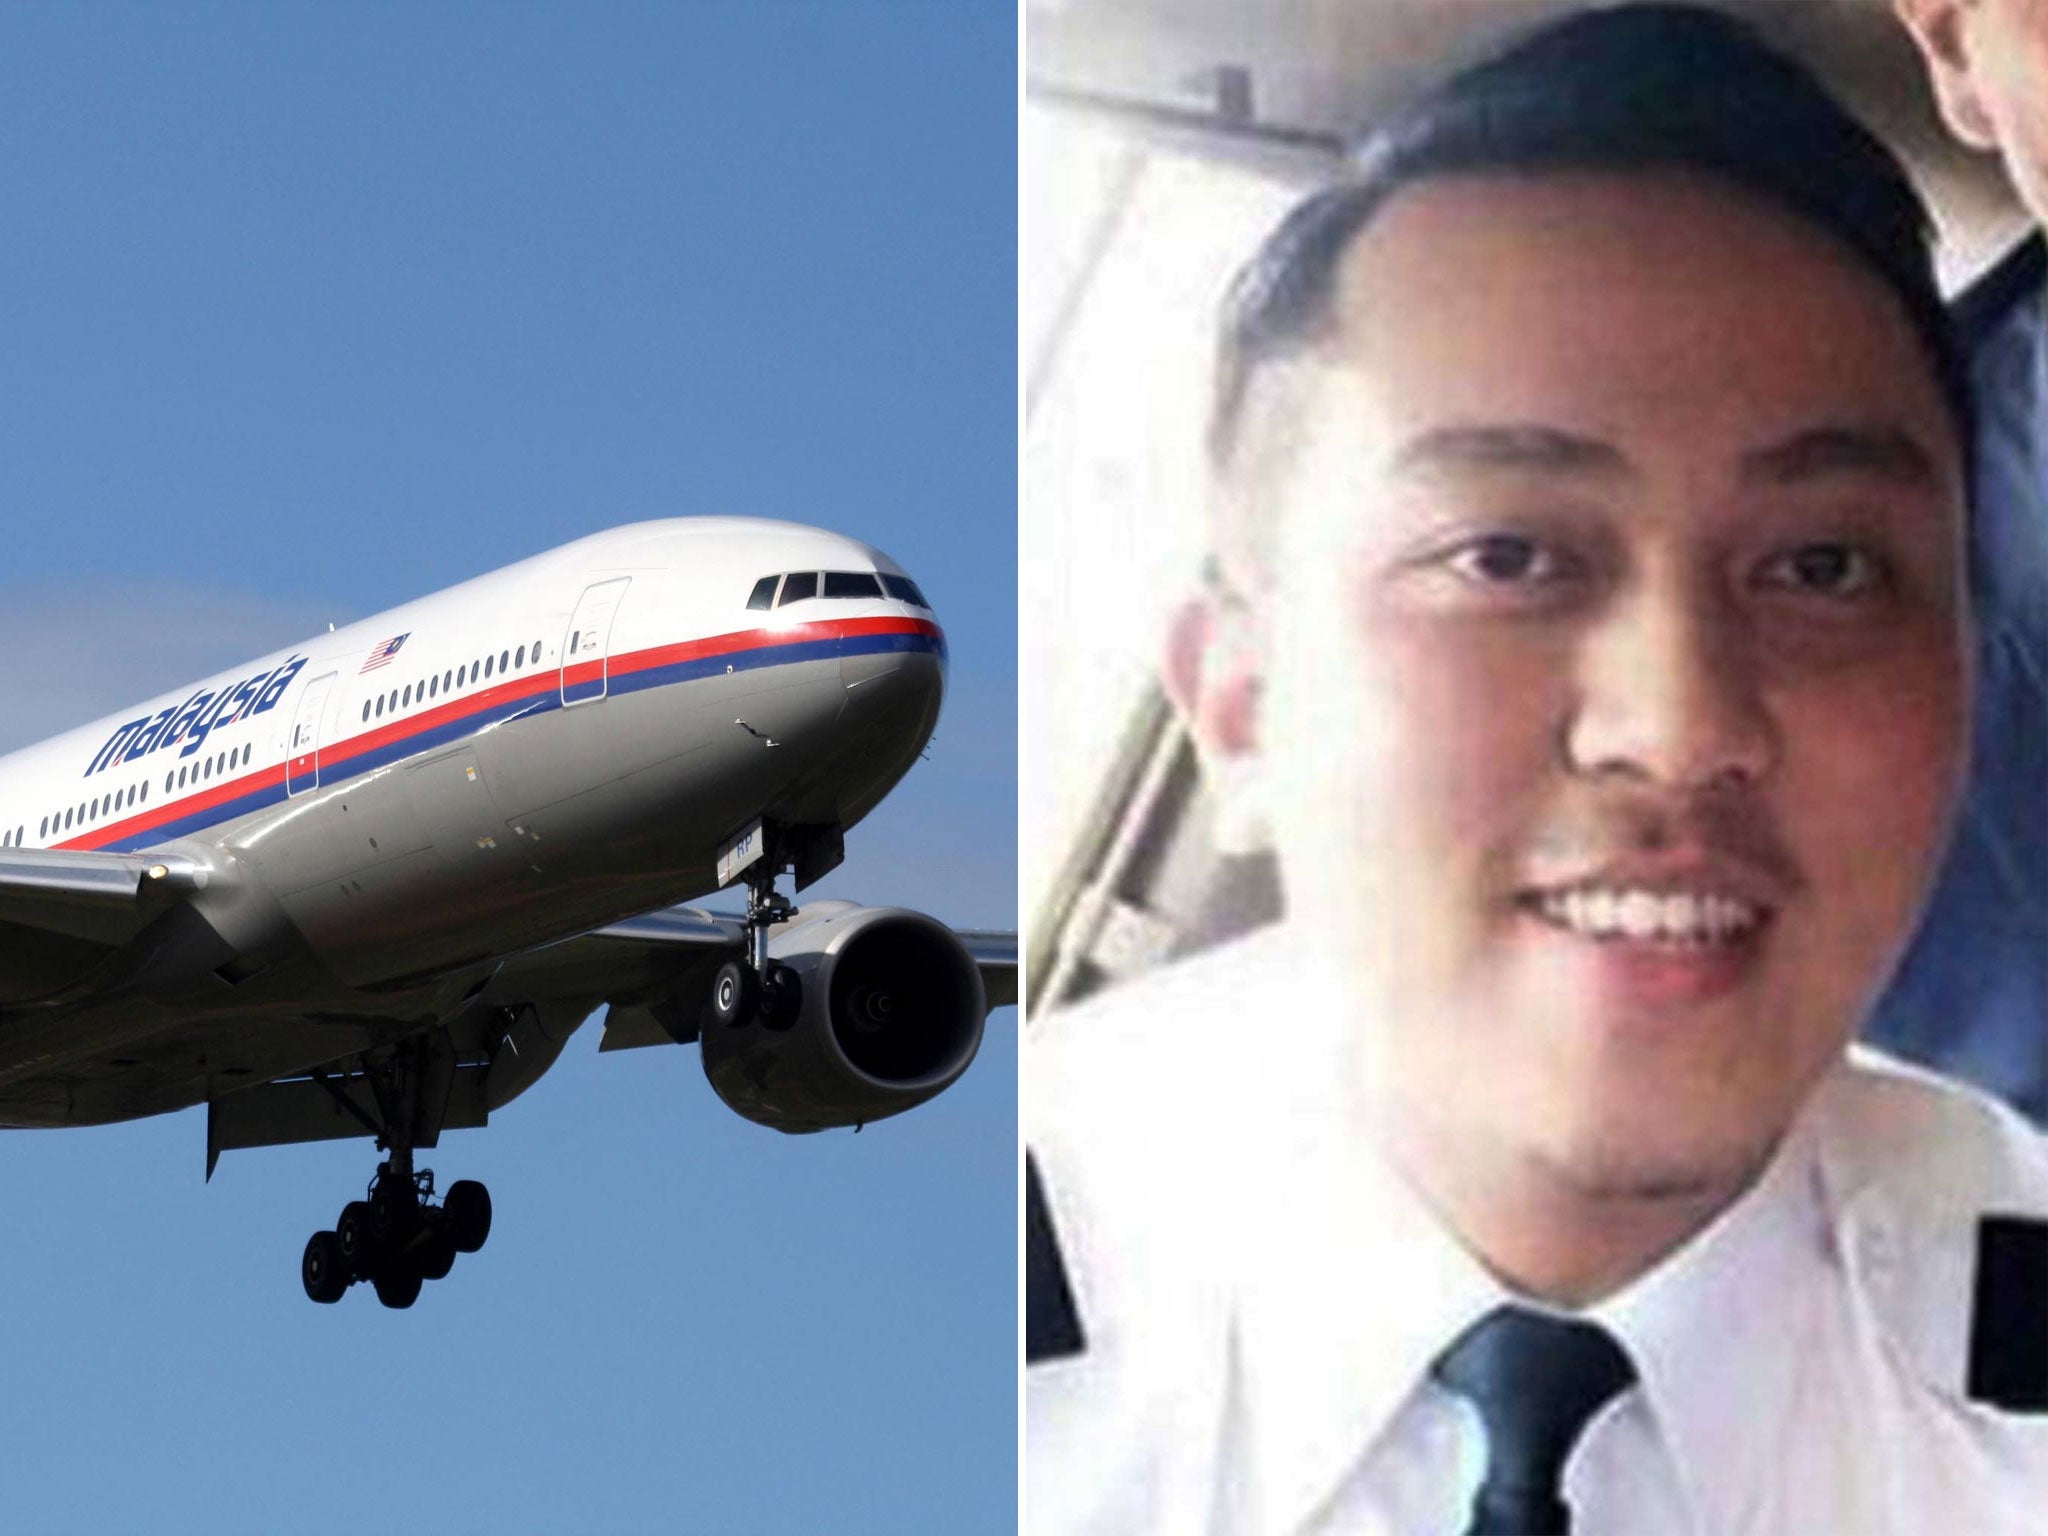 Network data show the phone belonging to co-pilot Fariq Abdul Hamid, 27, was on 30 minutes after MH370 turned west, according to CNN